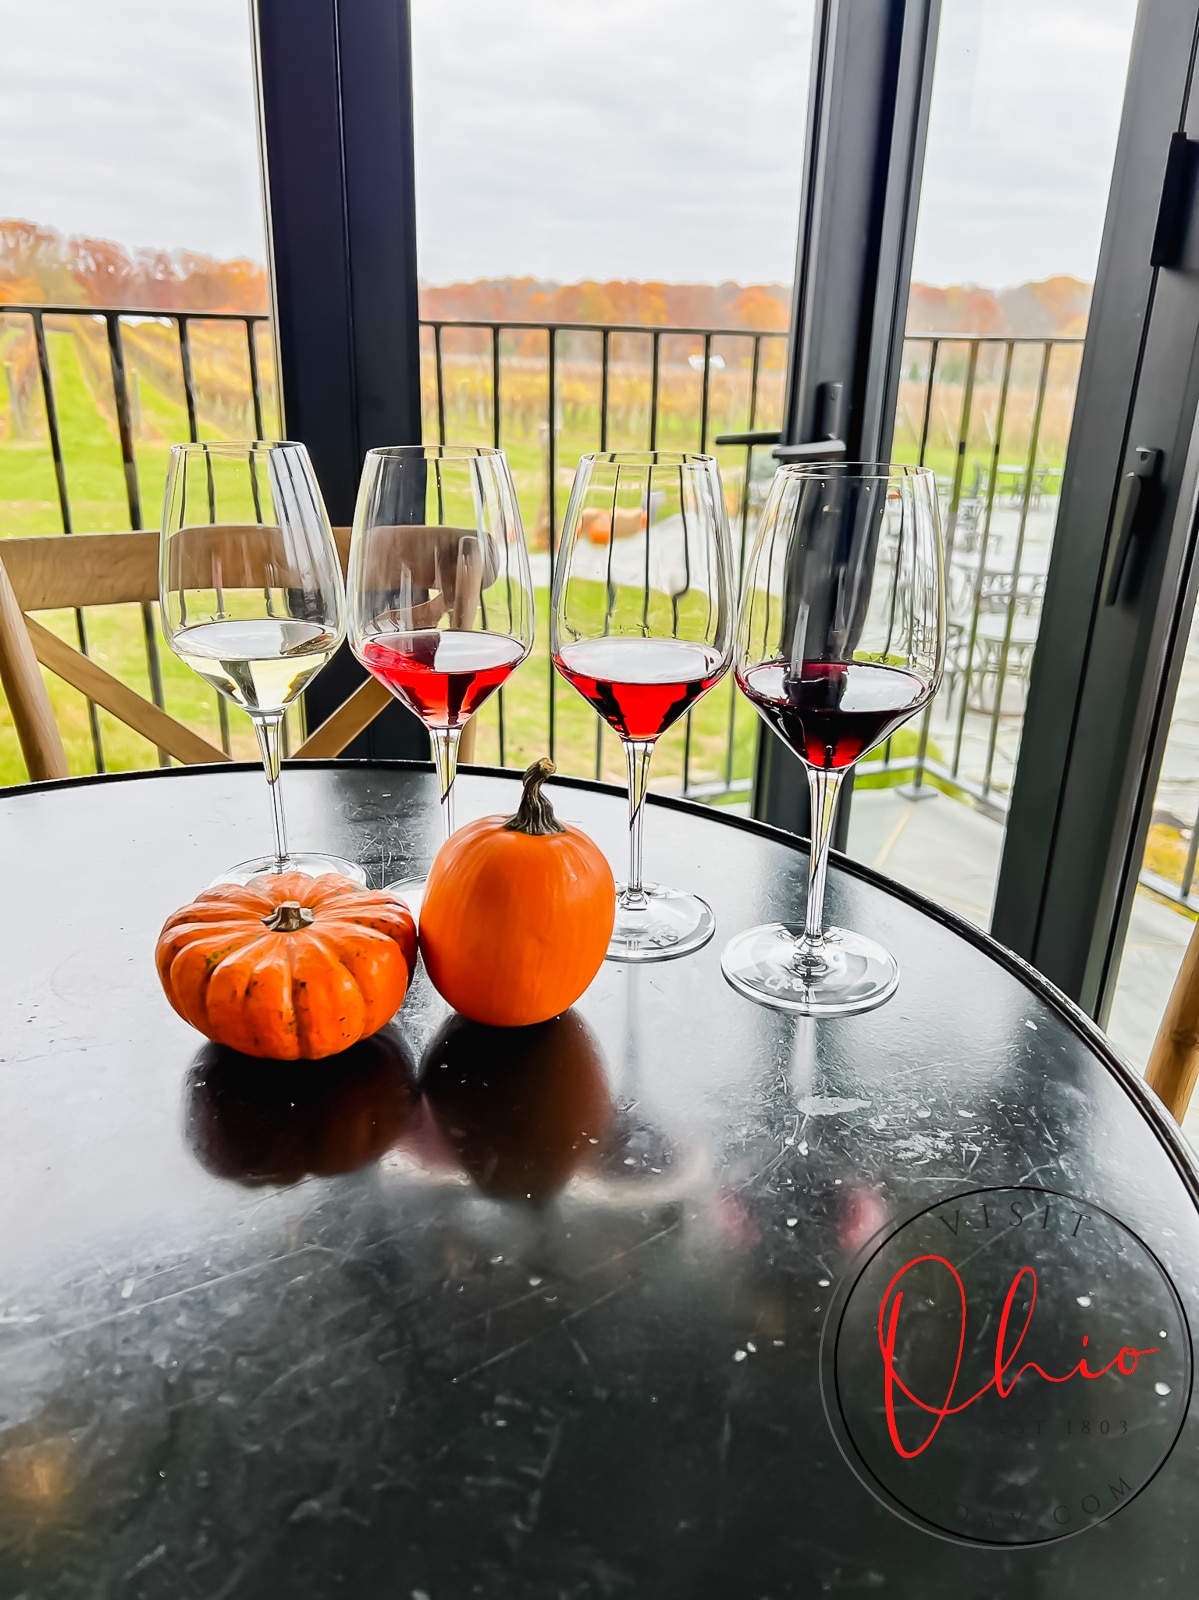 round black table, 4 wine glasses, two have white wine, 2 have red wine, two pumpkins on table